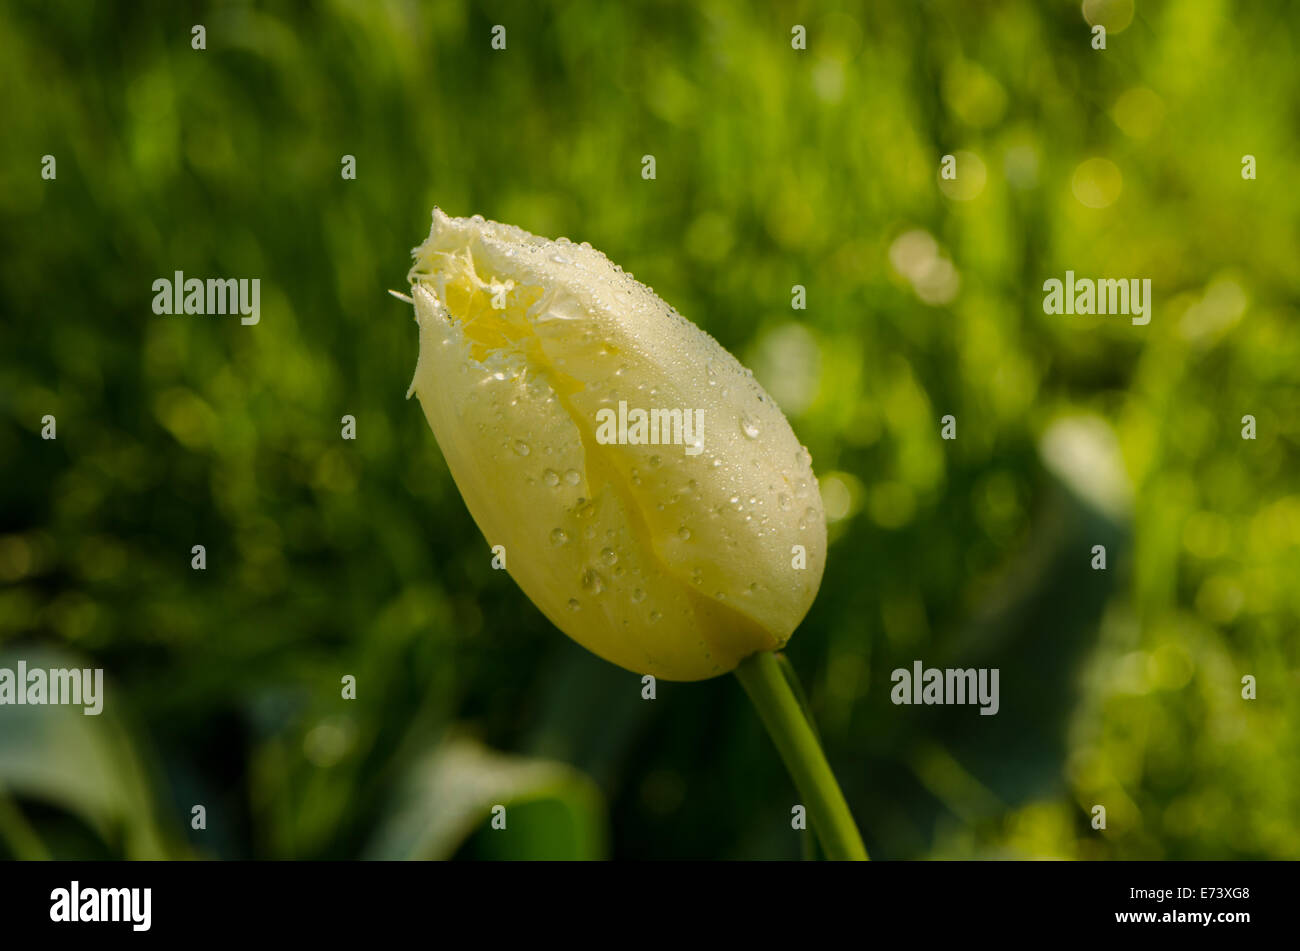 Early morning dew water drops on yellow decorative tulip flower bud bloom in spring garden. Birds sing. Stock Photo